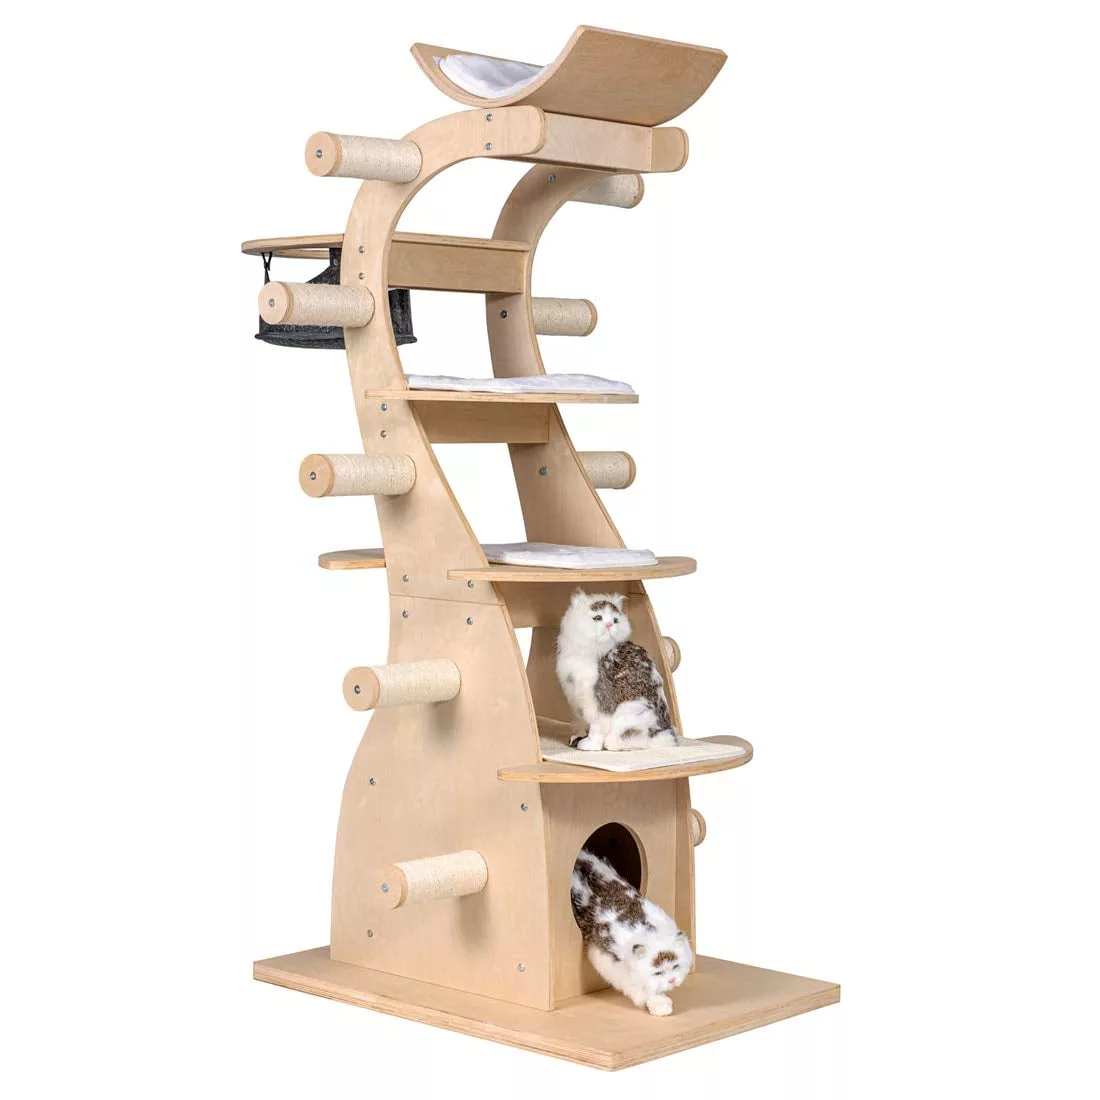 Why Are Cat Trees So Expensive?